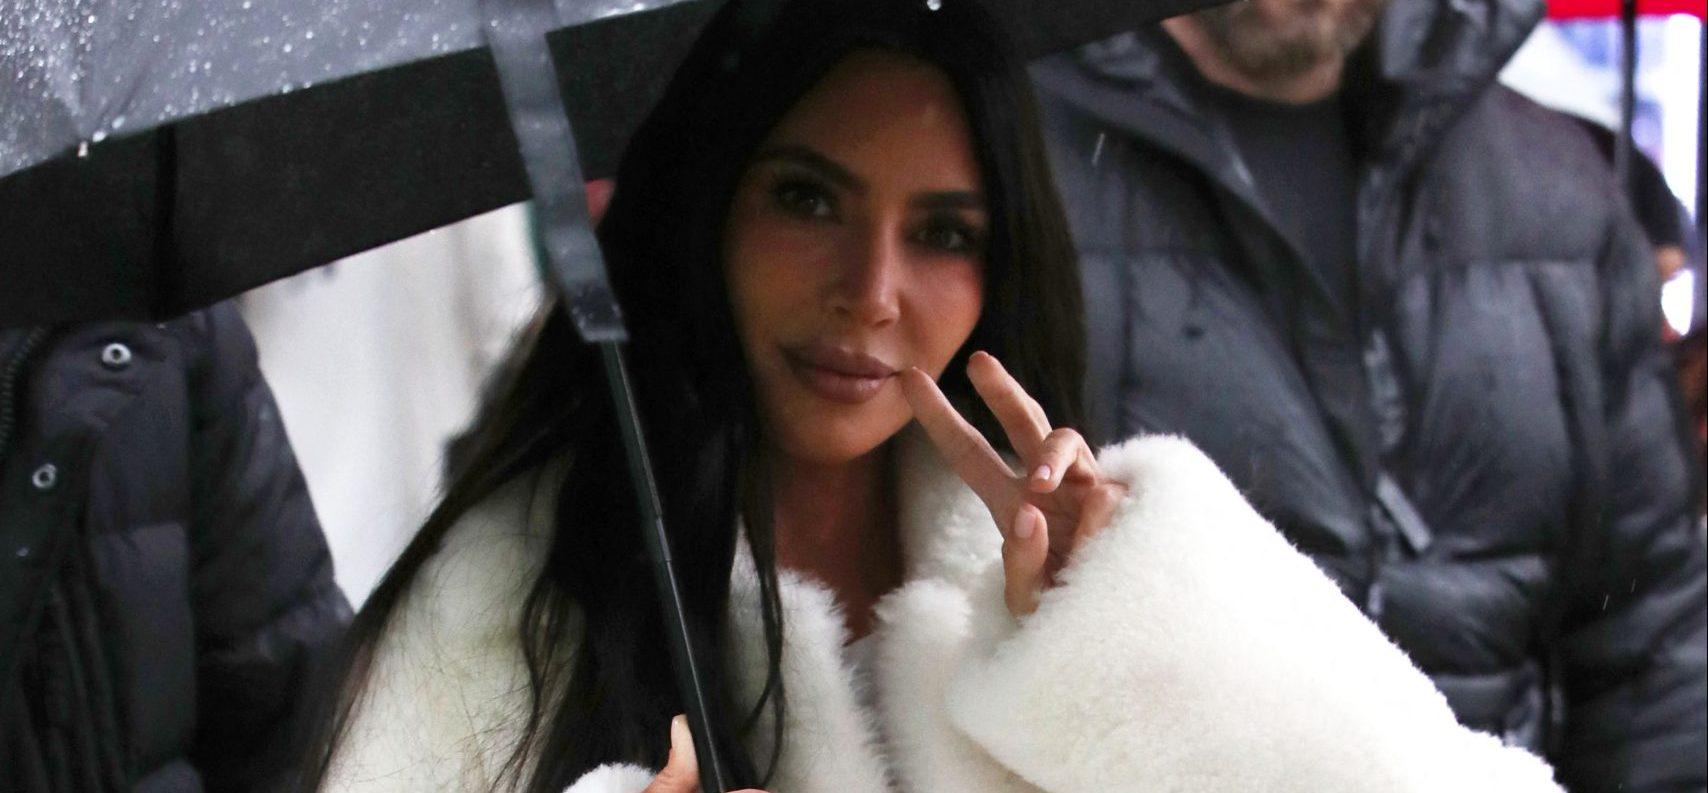 Kim Kardashian’s Number ONE Desire In Potential Partner Is Protection: ‘Fight For Me’